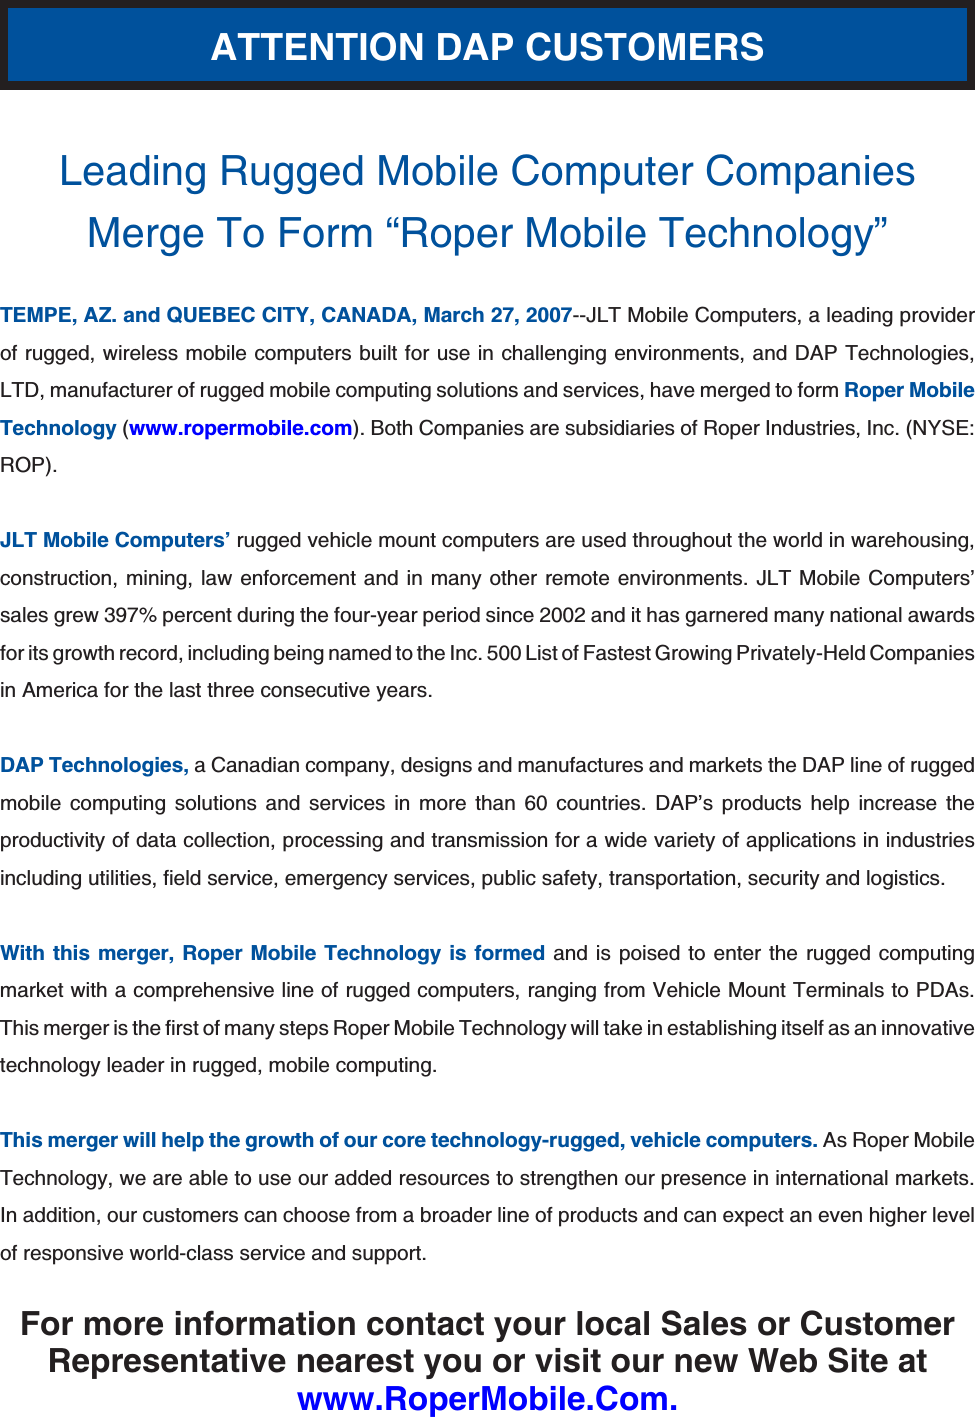 Leading Rugged Mobile Computer Companies Merge To Form “Roper Mobile Technology”TEMPE, AZ. and QUEBEC CITY, CANADA, March 27, 2007--JLT Mobile Computers, a leading provider of rugged, wireless mobile computers built for use in challenging environments, and DAP Technologies, LTD, manufacturer of rugged mobile computing solutions and services, have merged to form Roper Mobile Technology (www.ropermobile.com). Both Companies are subsidiaries of Roper Industries, Inc. (NYSE: ROP).JLT Mobile Computers’ rugged vehicle mount computers are used throughout the world in warehousing, construction, mining, law enforcement and in many other remote environments. JLT Mobile Computers’ sales grew 397% percent during the four-year period since 2002 and it has garnered many national awards for its growth record, including being named to the Inc. 500 List of Fastest Growing Privately-Held Companies in America for the last three consecutive years.DAP Technologies, a Canadian company, designs and manufactures and markets the DAP line of rugged mobile computing solutions and services in more than 60 countries. DAP’s products help increase the productivity of data collection, processing and transmission for a wide variety of applications in industries KPENWFKPIWVKNKVKGUſGNFUGTXKEGGOGTIGPE[UGTXKEGURWDNKEUCHGV[VTCPURQTVCVKQPUGEWTKV[CPFNQIKUVKEUWith this merger, Roper Mobile Technology is formed and is poised to enter the rugged computing market with a comprehensive line of rugged computers, ranging from Vehicle Mount Terminals to PDAs. 6JKUOGTIGTKUVJGſTUVQHOCP[UVGRU4QRGT/QDKNG6GEJPQNQI[YKNNVCMGKPGUVCDNKUJKPIKVUGNHCUCPKPPQXCVKXGtechnology leader in rugged, mobile computing.This merger will help the growth of our core technology-rugged, vehicle computers. As Roper Mobile Technology, we are able to use our added resources to strengthen our presence in international markets. In addition, our customers can choose from a broader line of products and can expect an even higher level of responsive world-class service and support.For more information contact your local Sales or Customer Representative nearest you or visit our new Web Site atwww.RoperMobile.Com.ATTENTION DAP CUSTOMERS